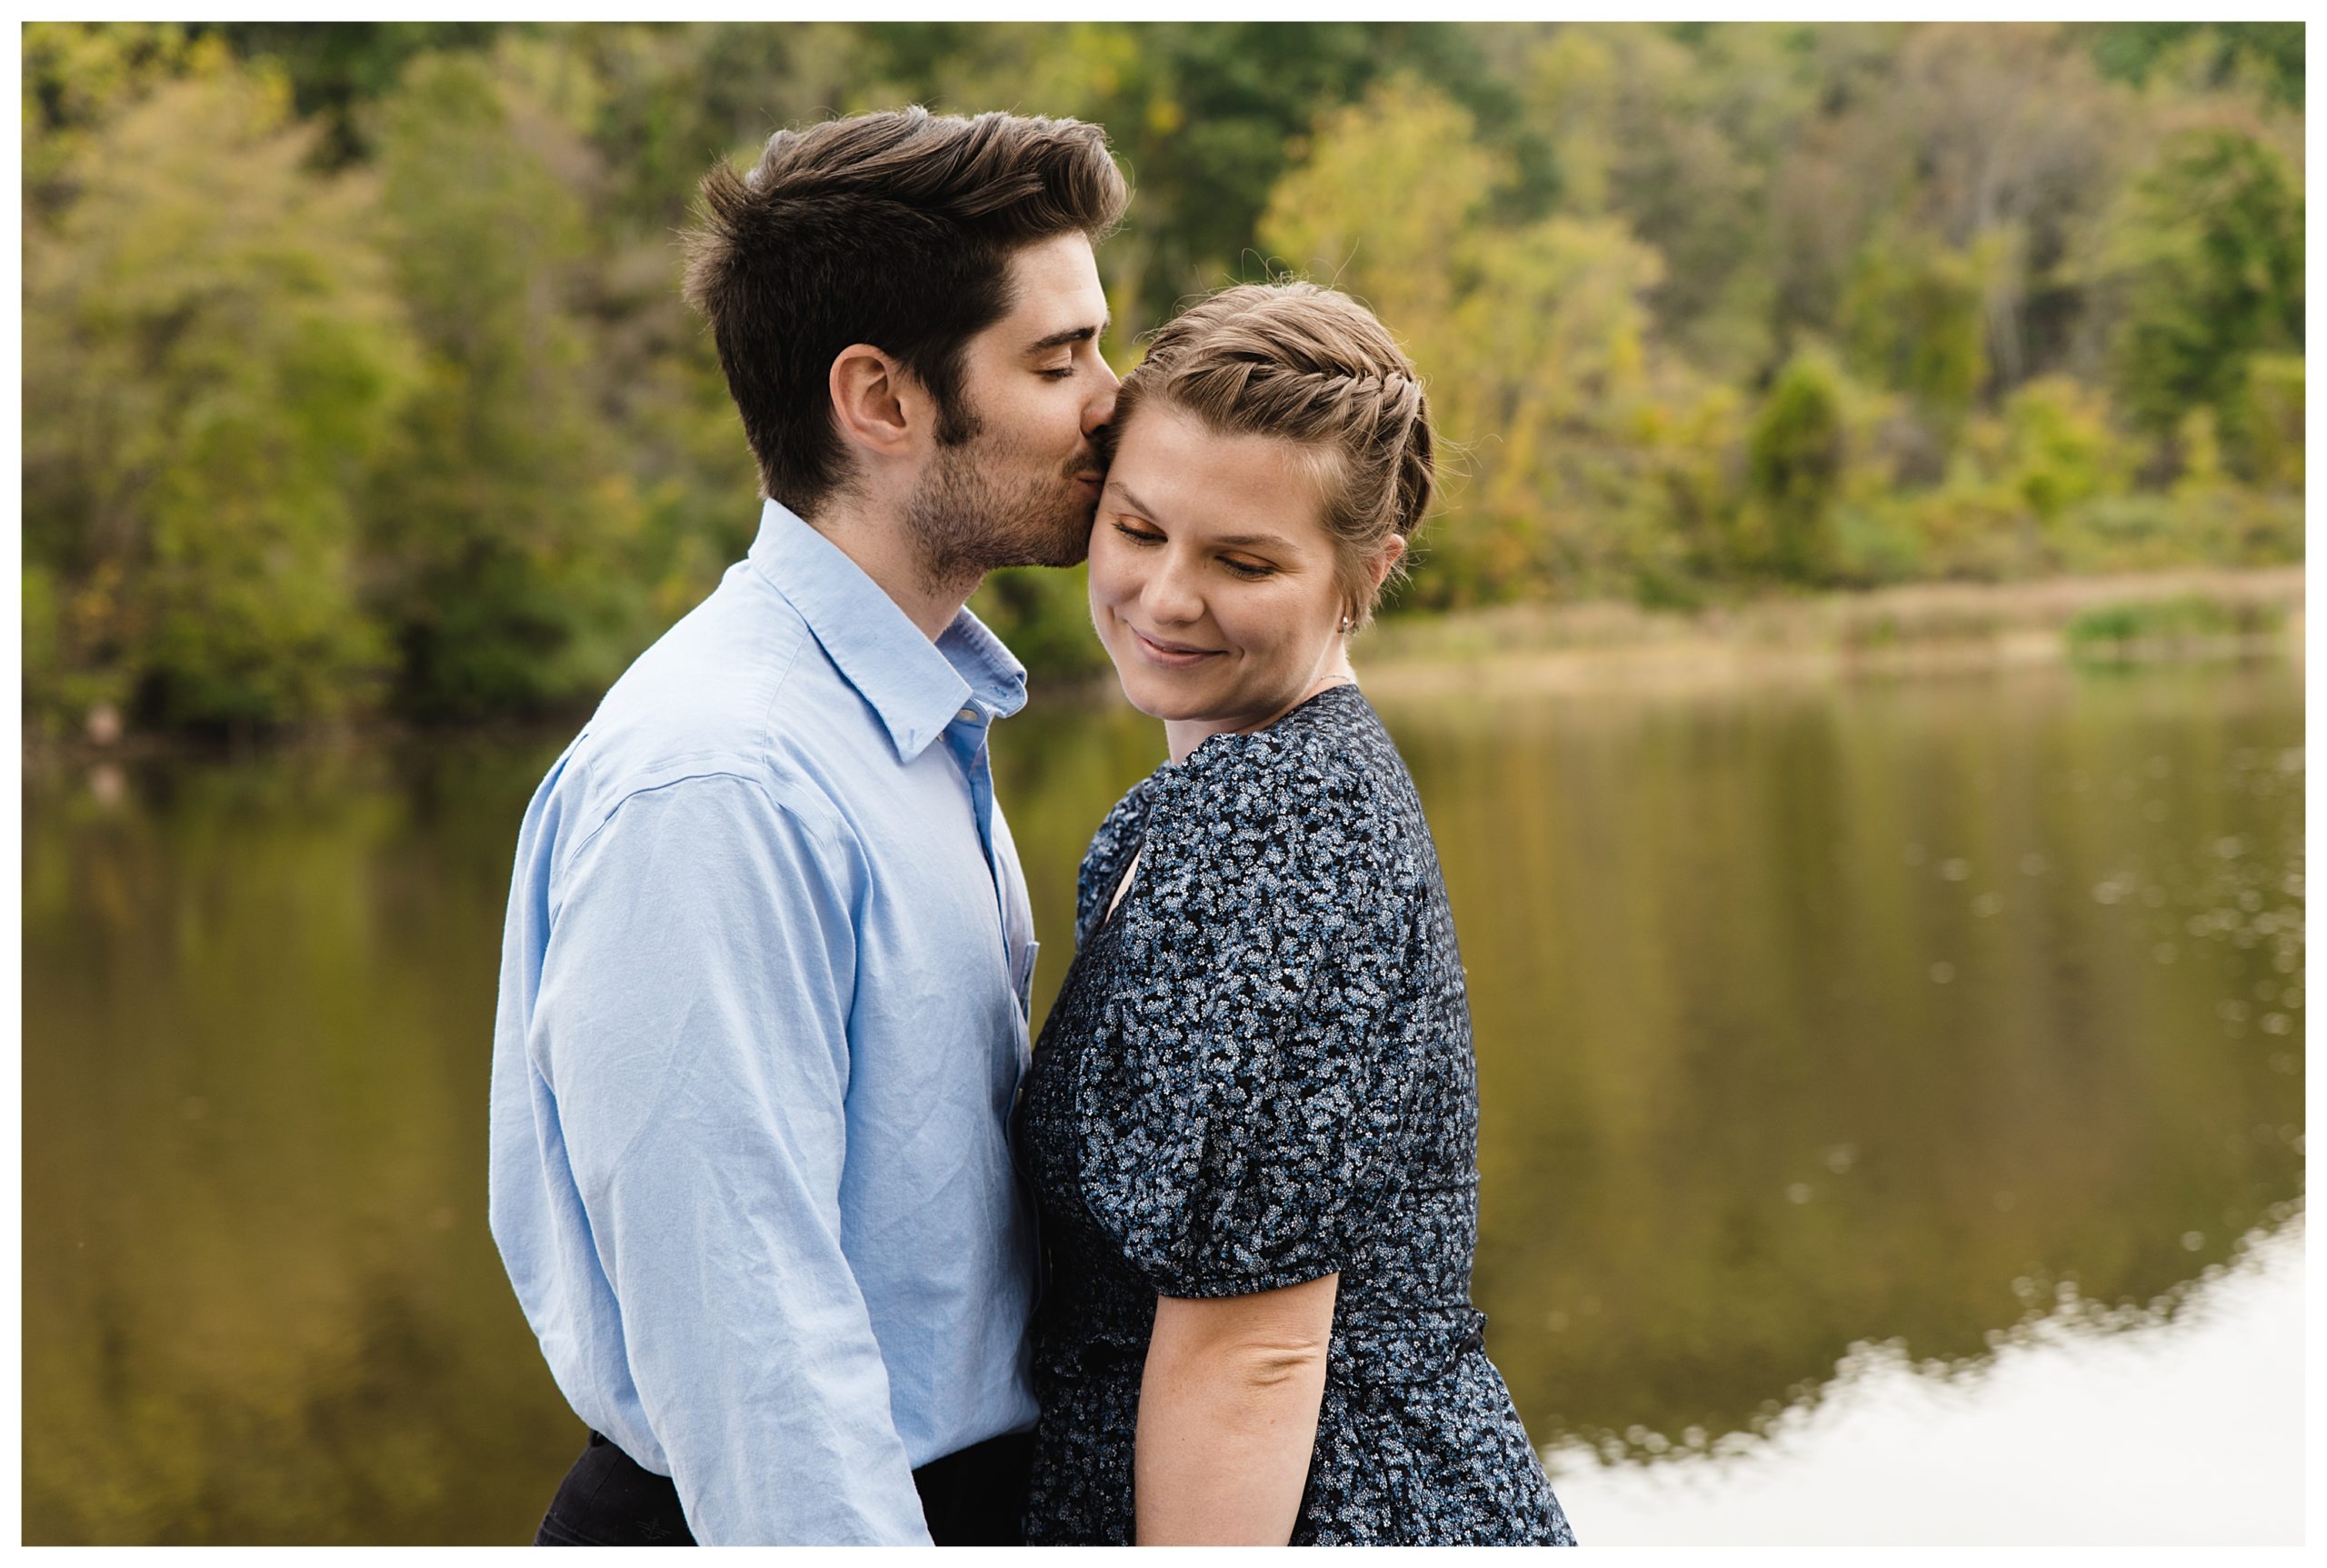 groom-to-be kissing bride-to-be on cheek during engagement session